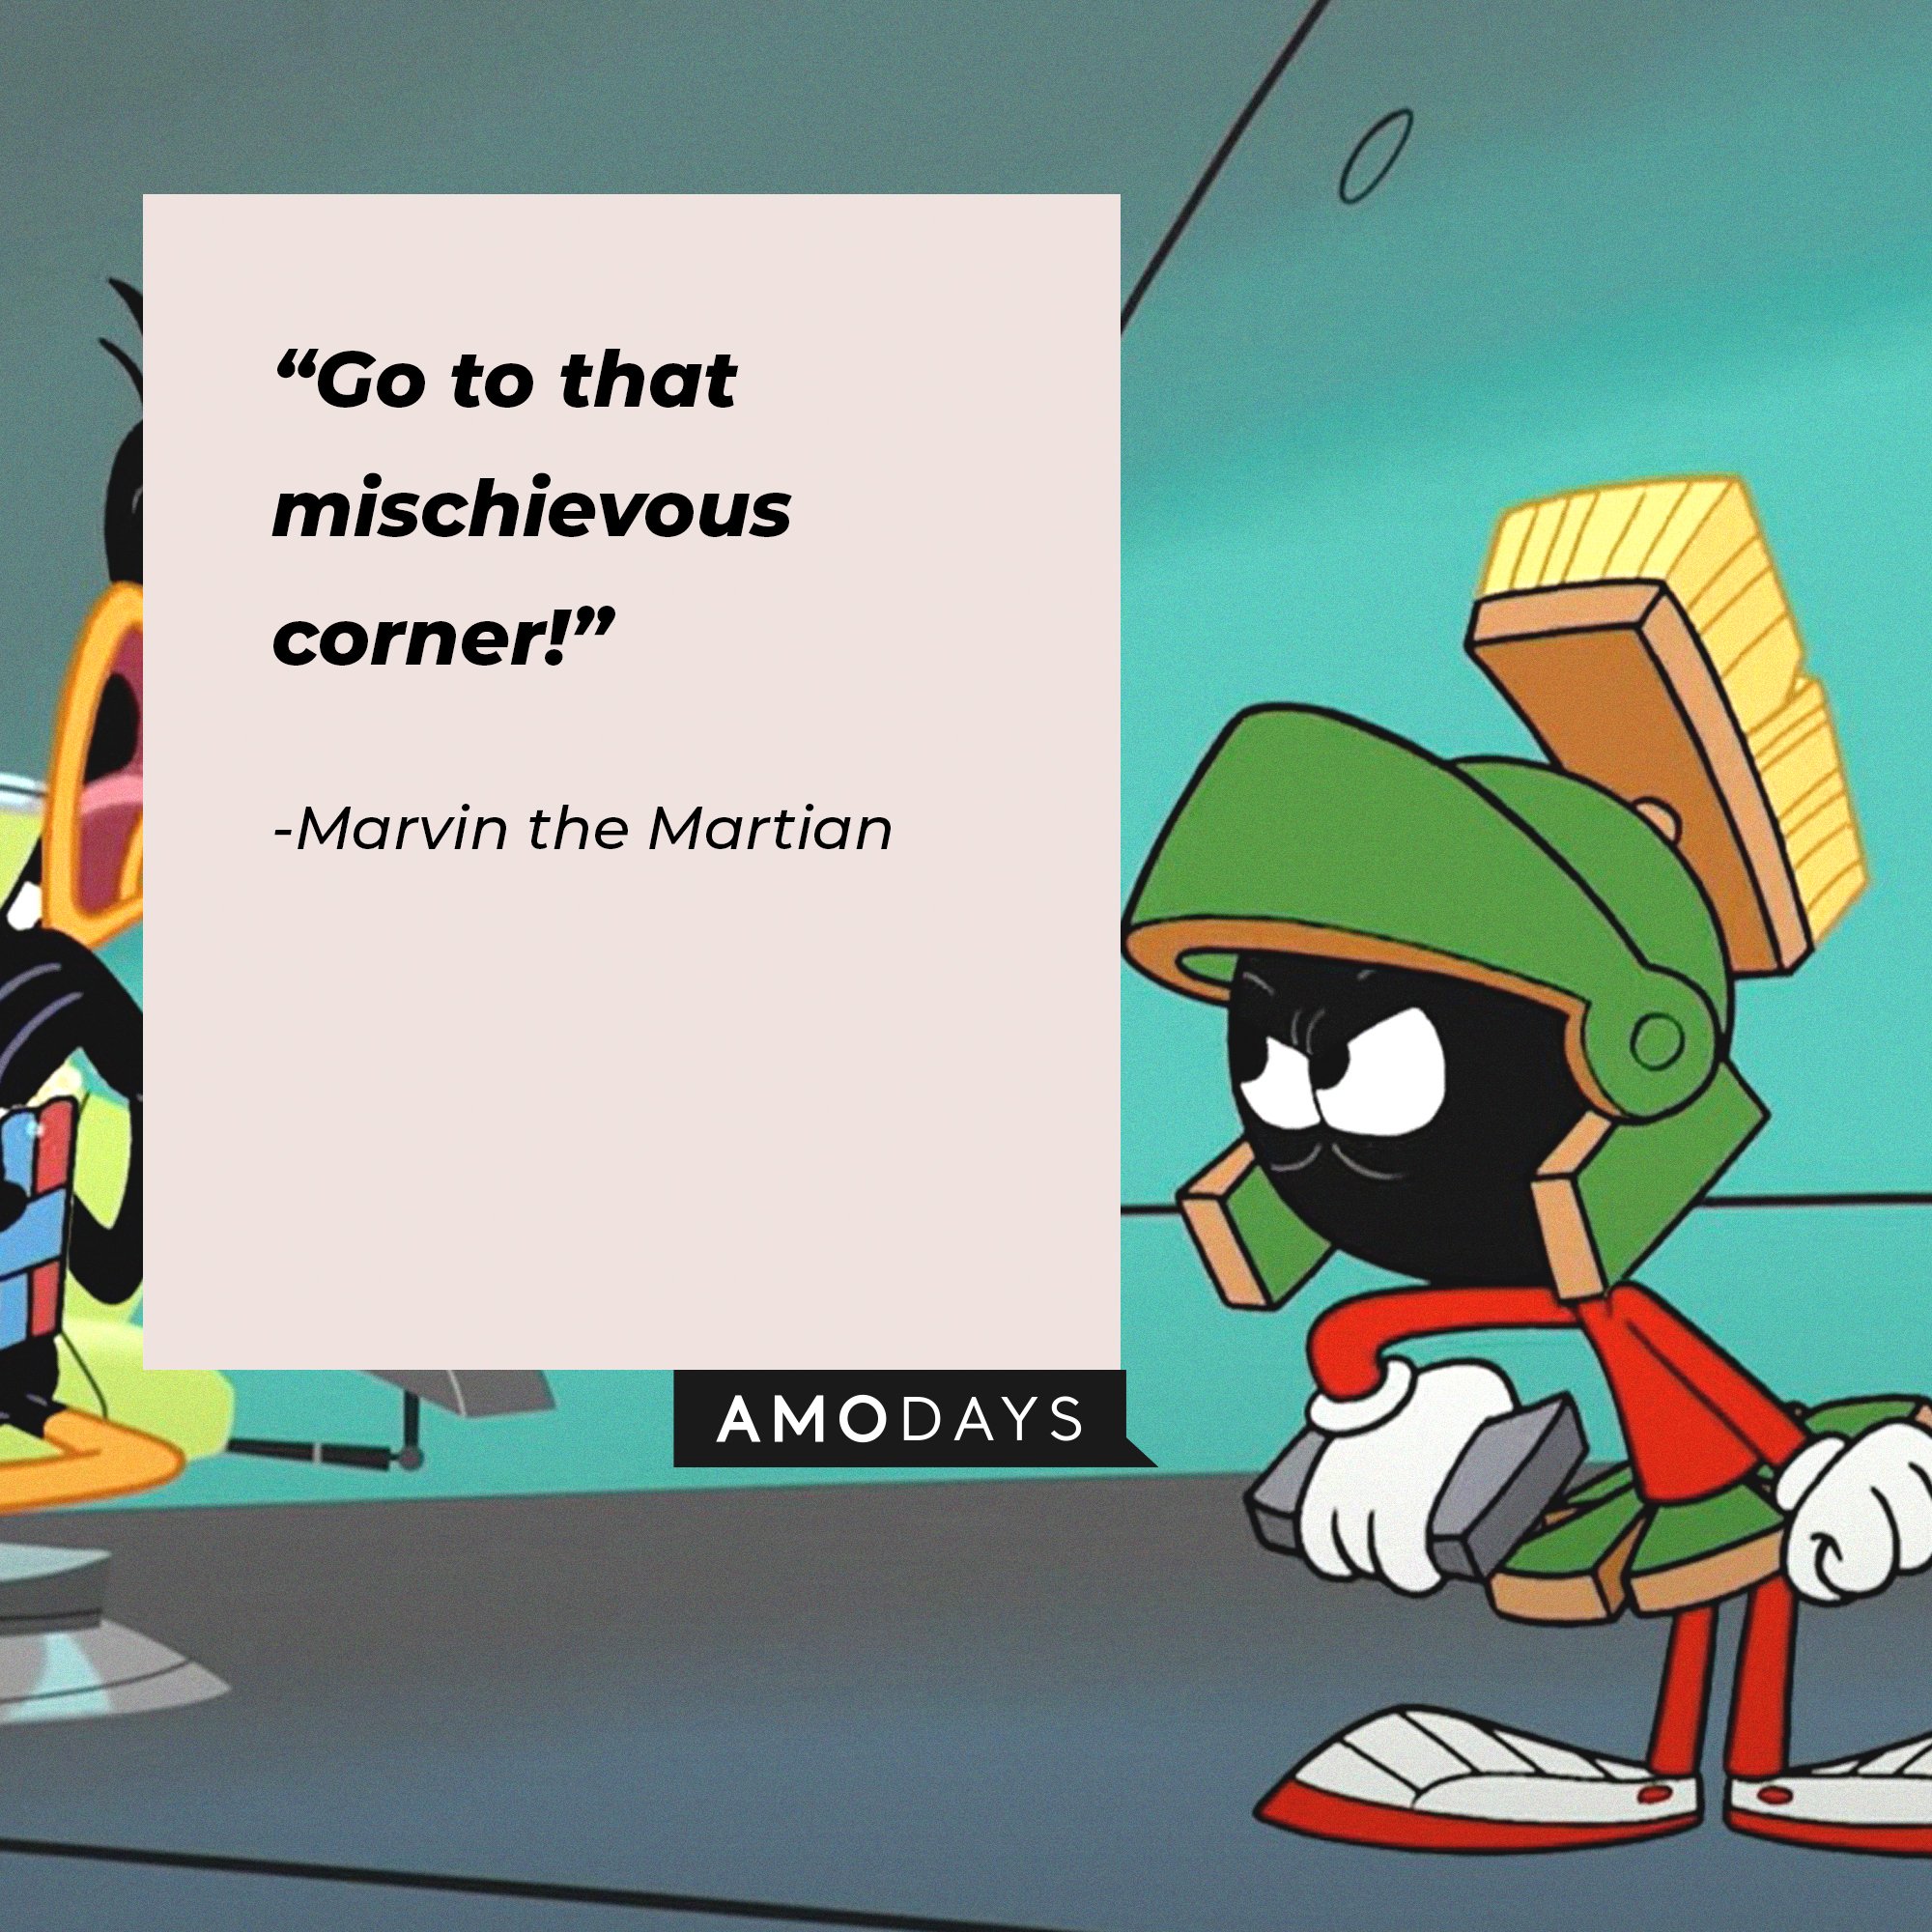 Marvin the Martian’s quote: "Go to that mischievous corner!" | Image: AmoDays